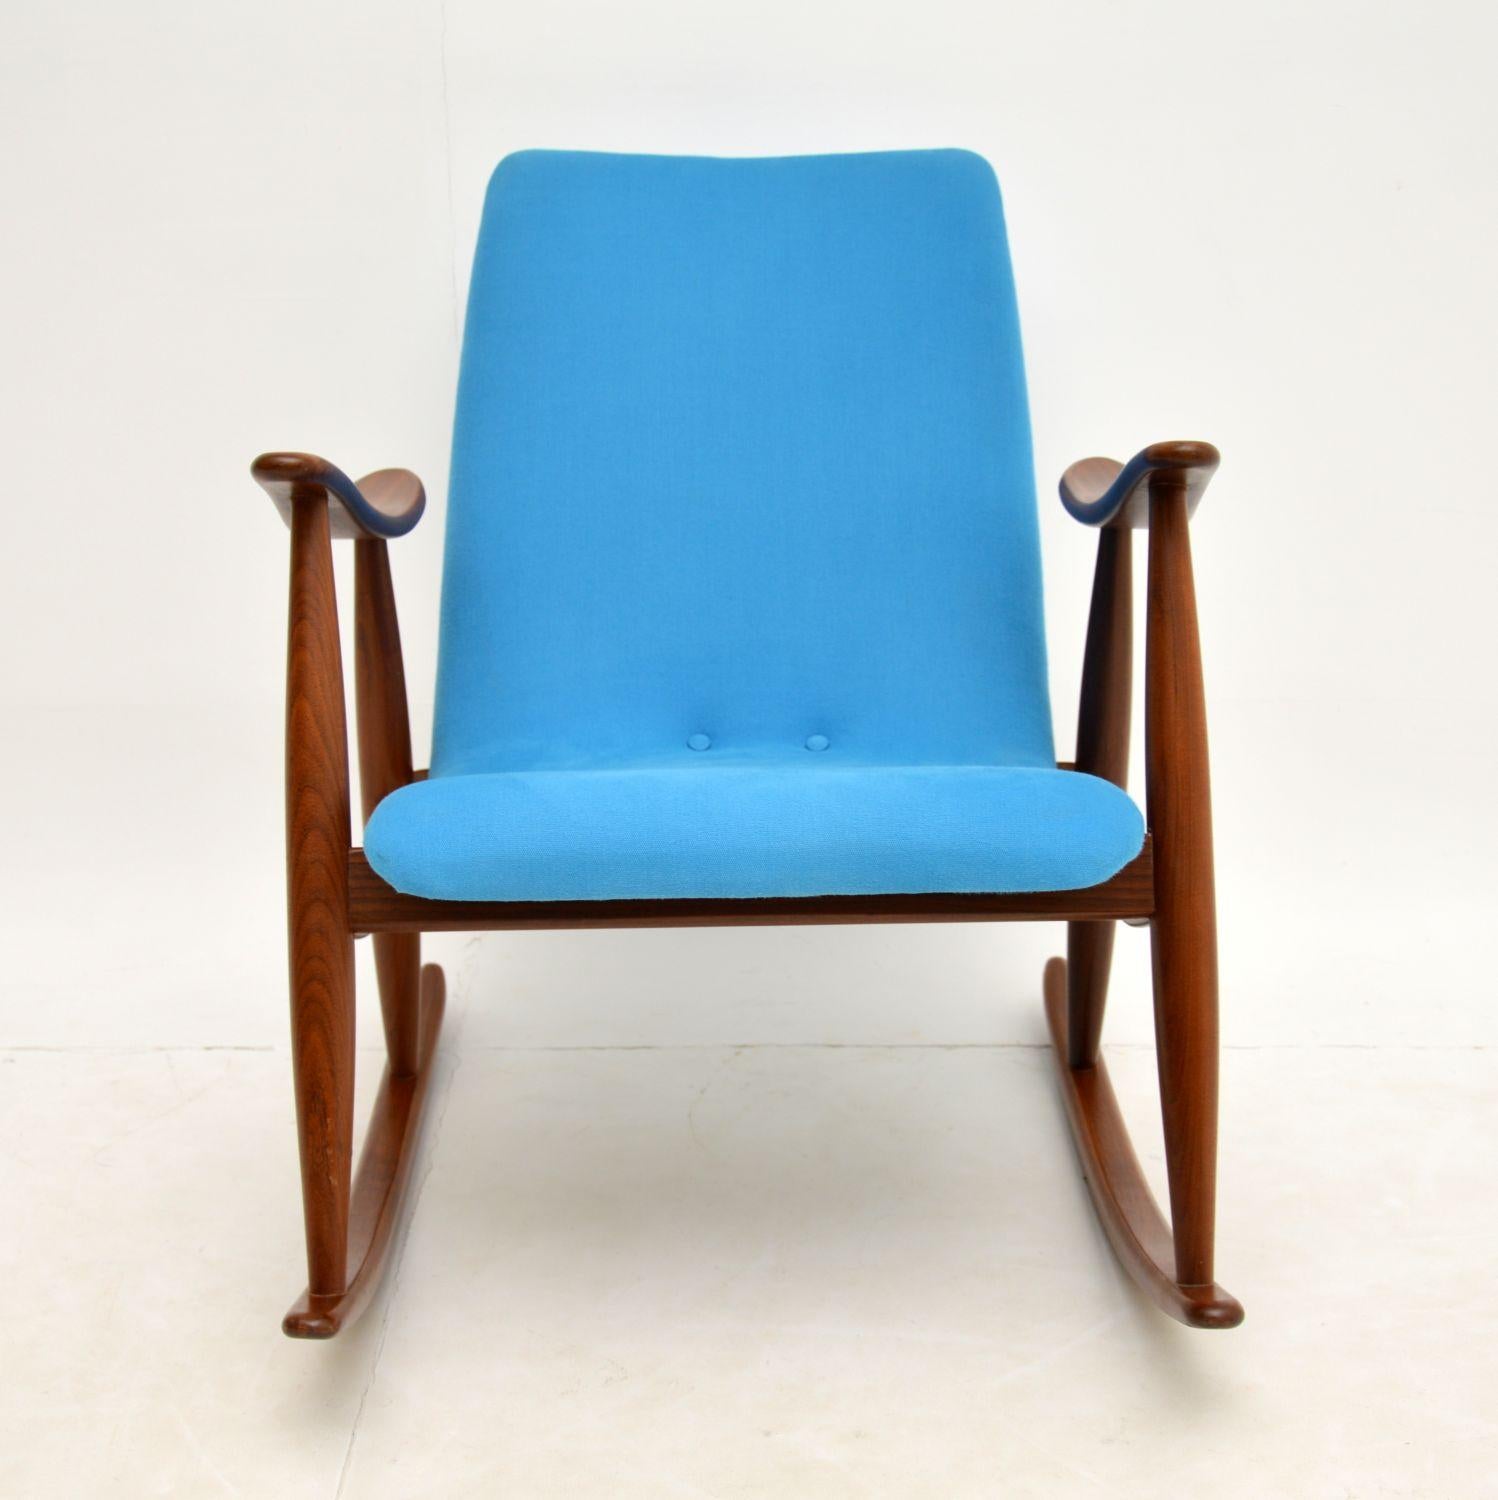 A beautiful, extremely comfortable and rare Dutch rocking chair. This was designed by Louis Van Teefelen, it dates from the 1960’s.

We have had it fully restored, the condition is superb throughout. The solid afromosia wood frame has been